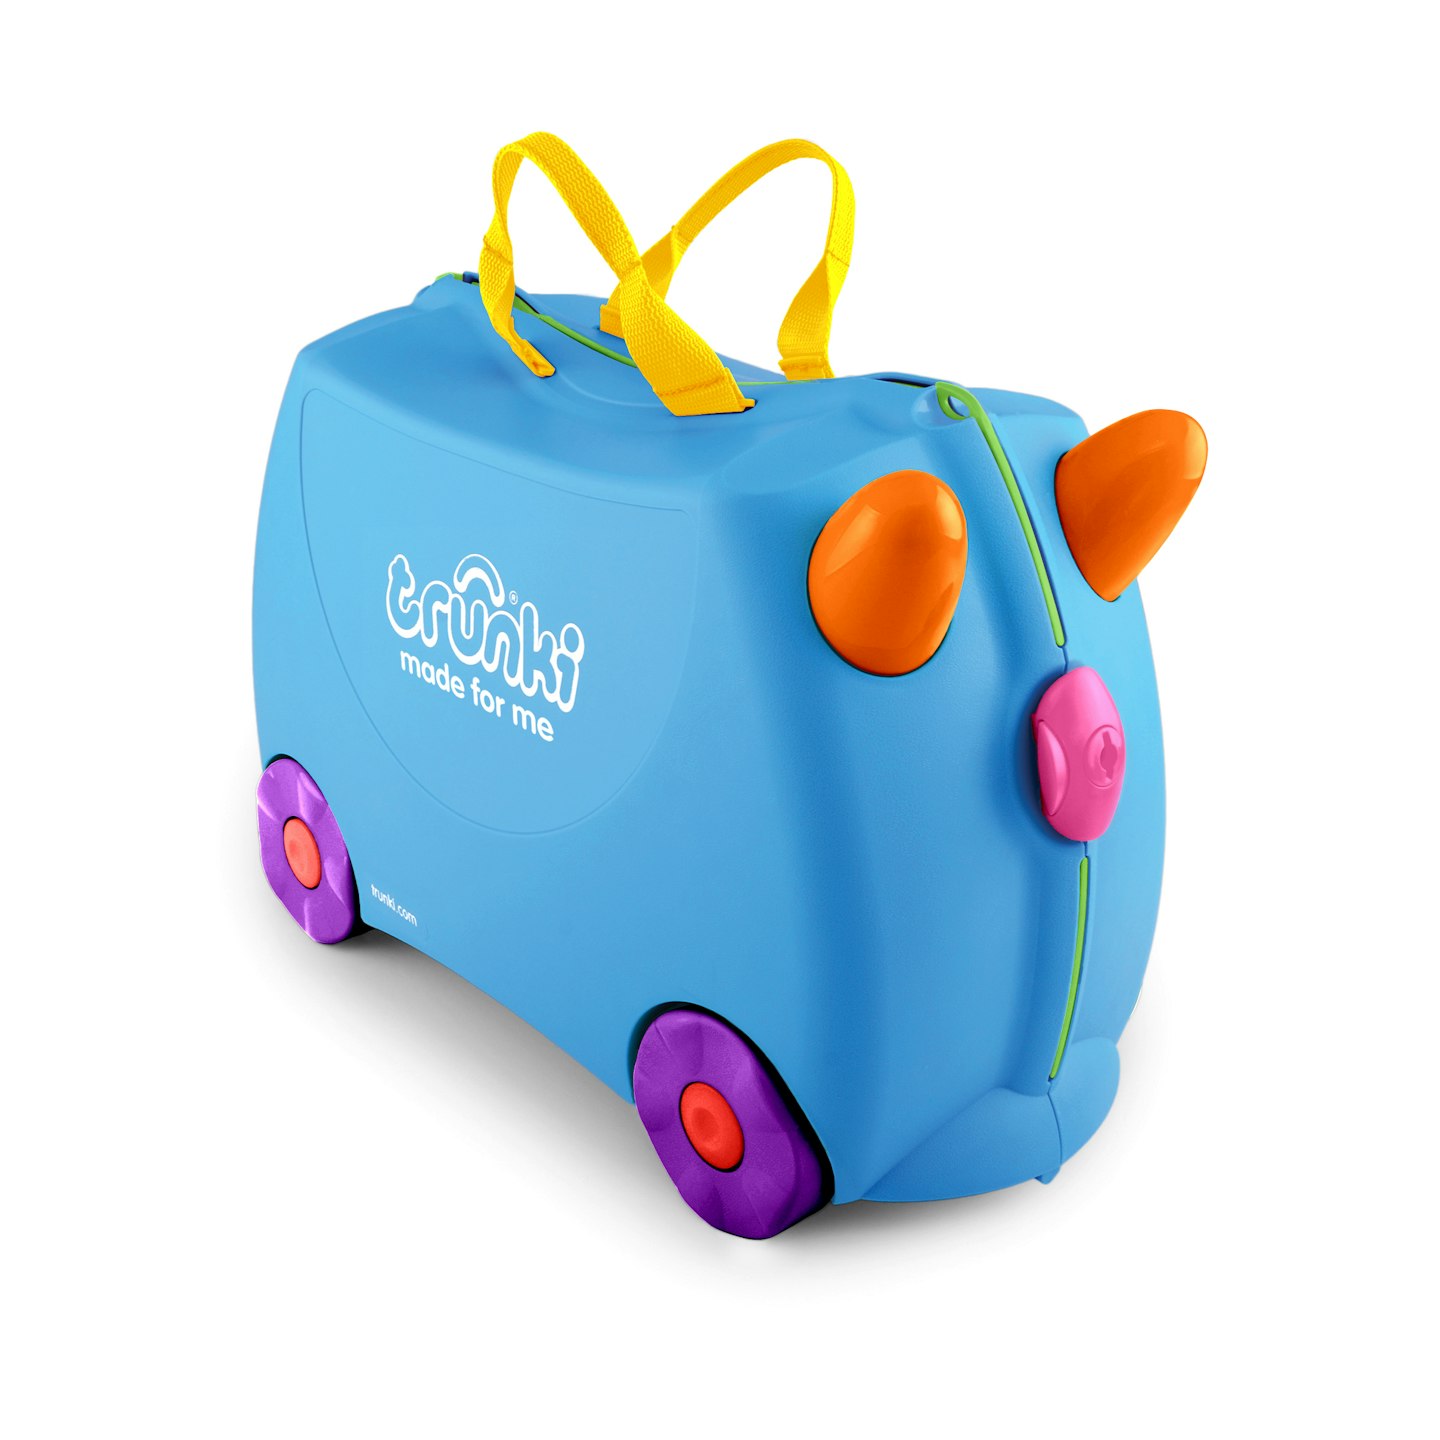 Trunki Made for Me